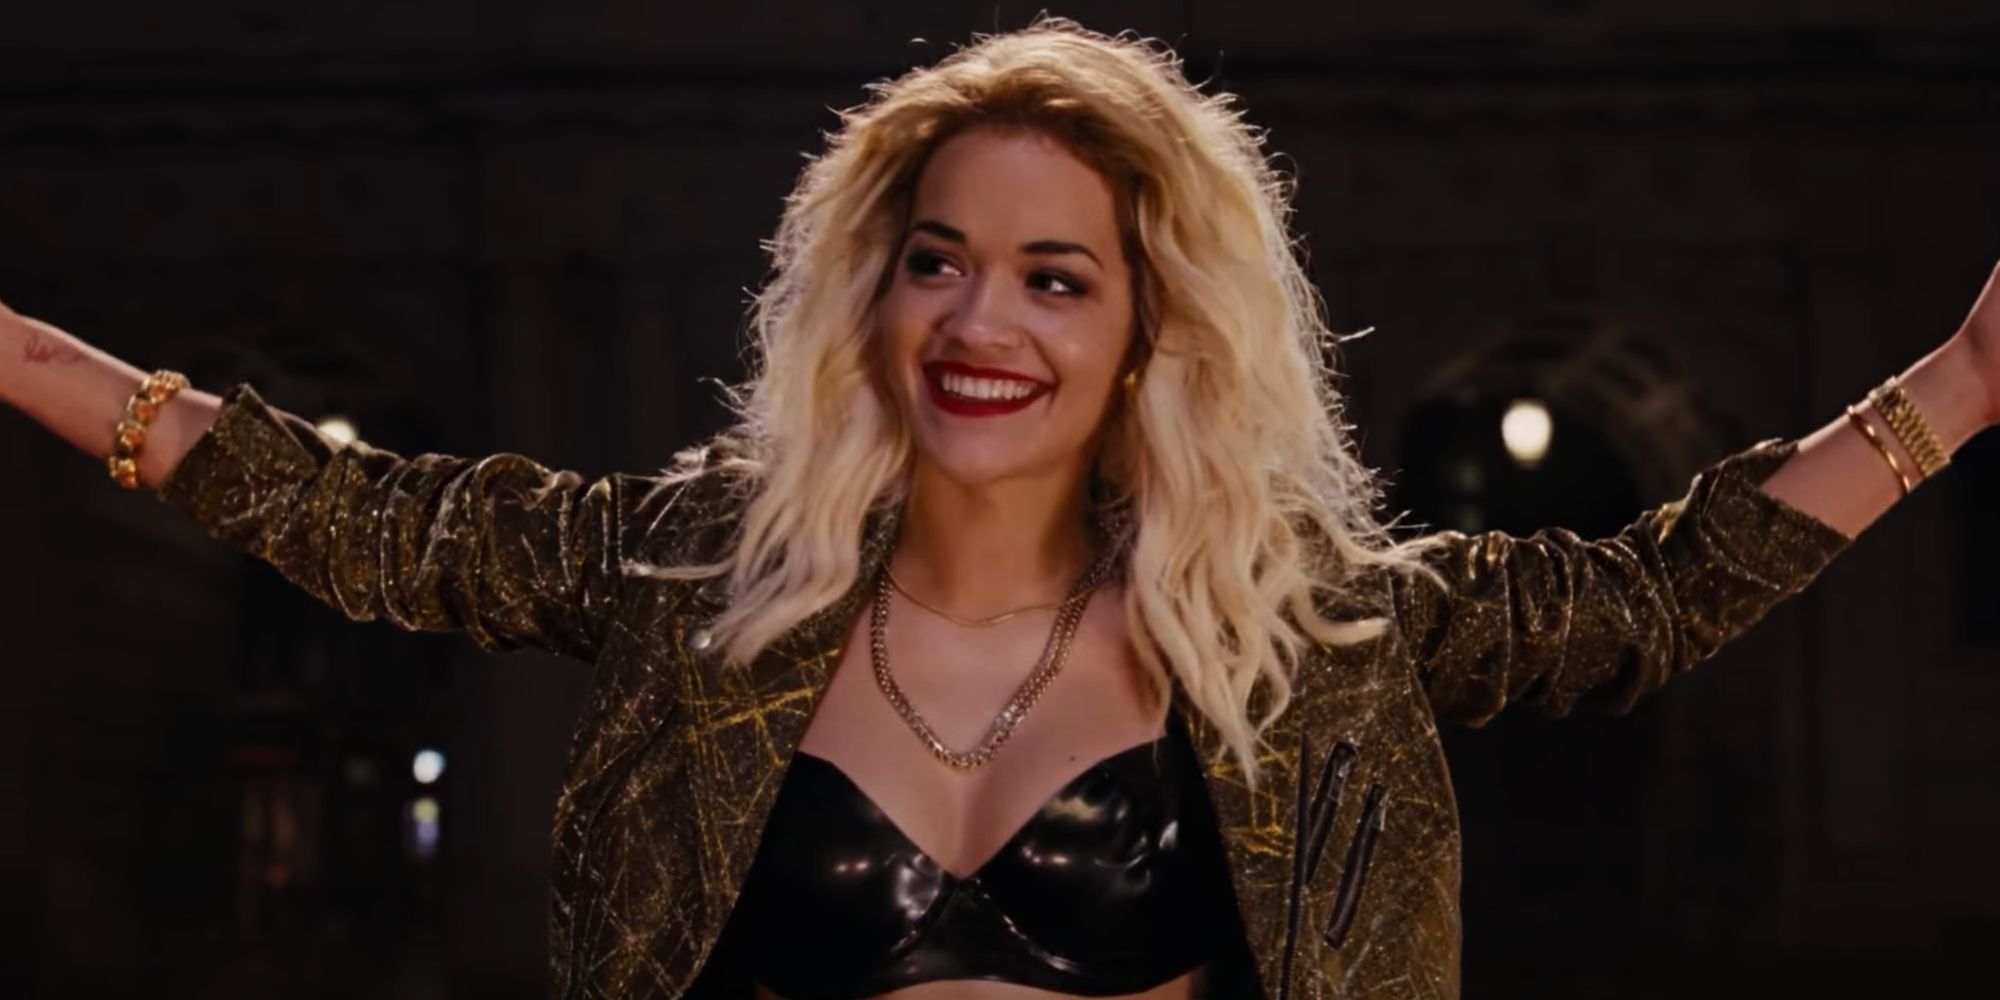 Rita Ora standing with her arms raised in Fast and Furious 6 